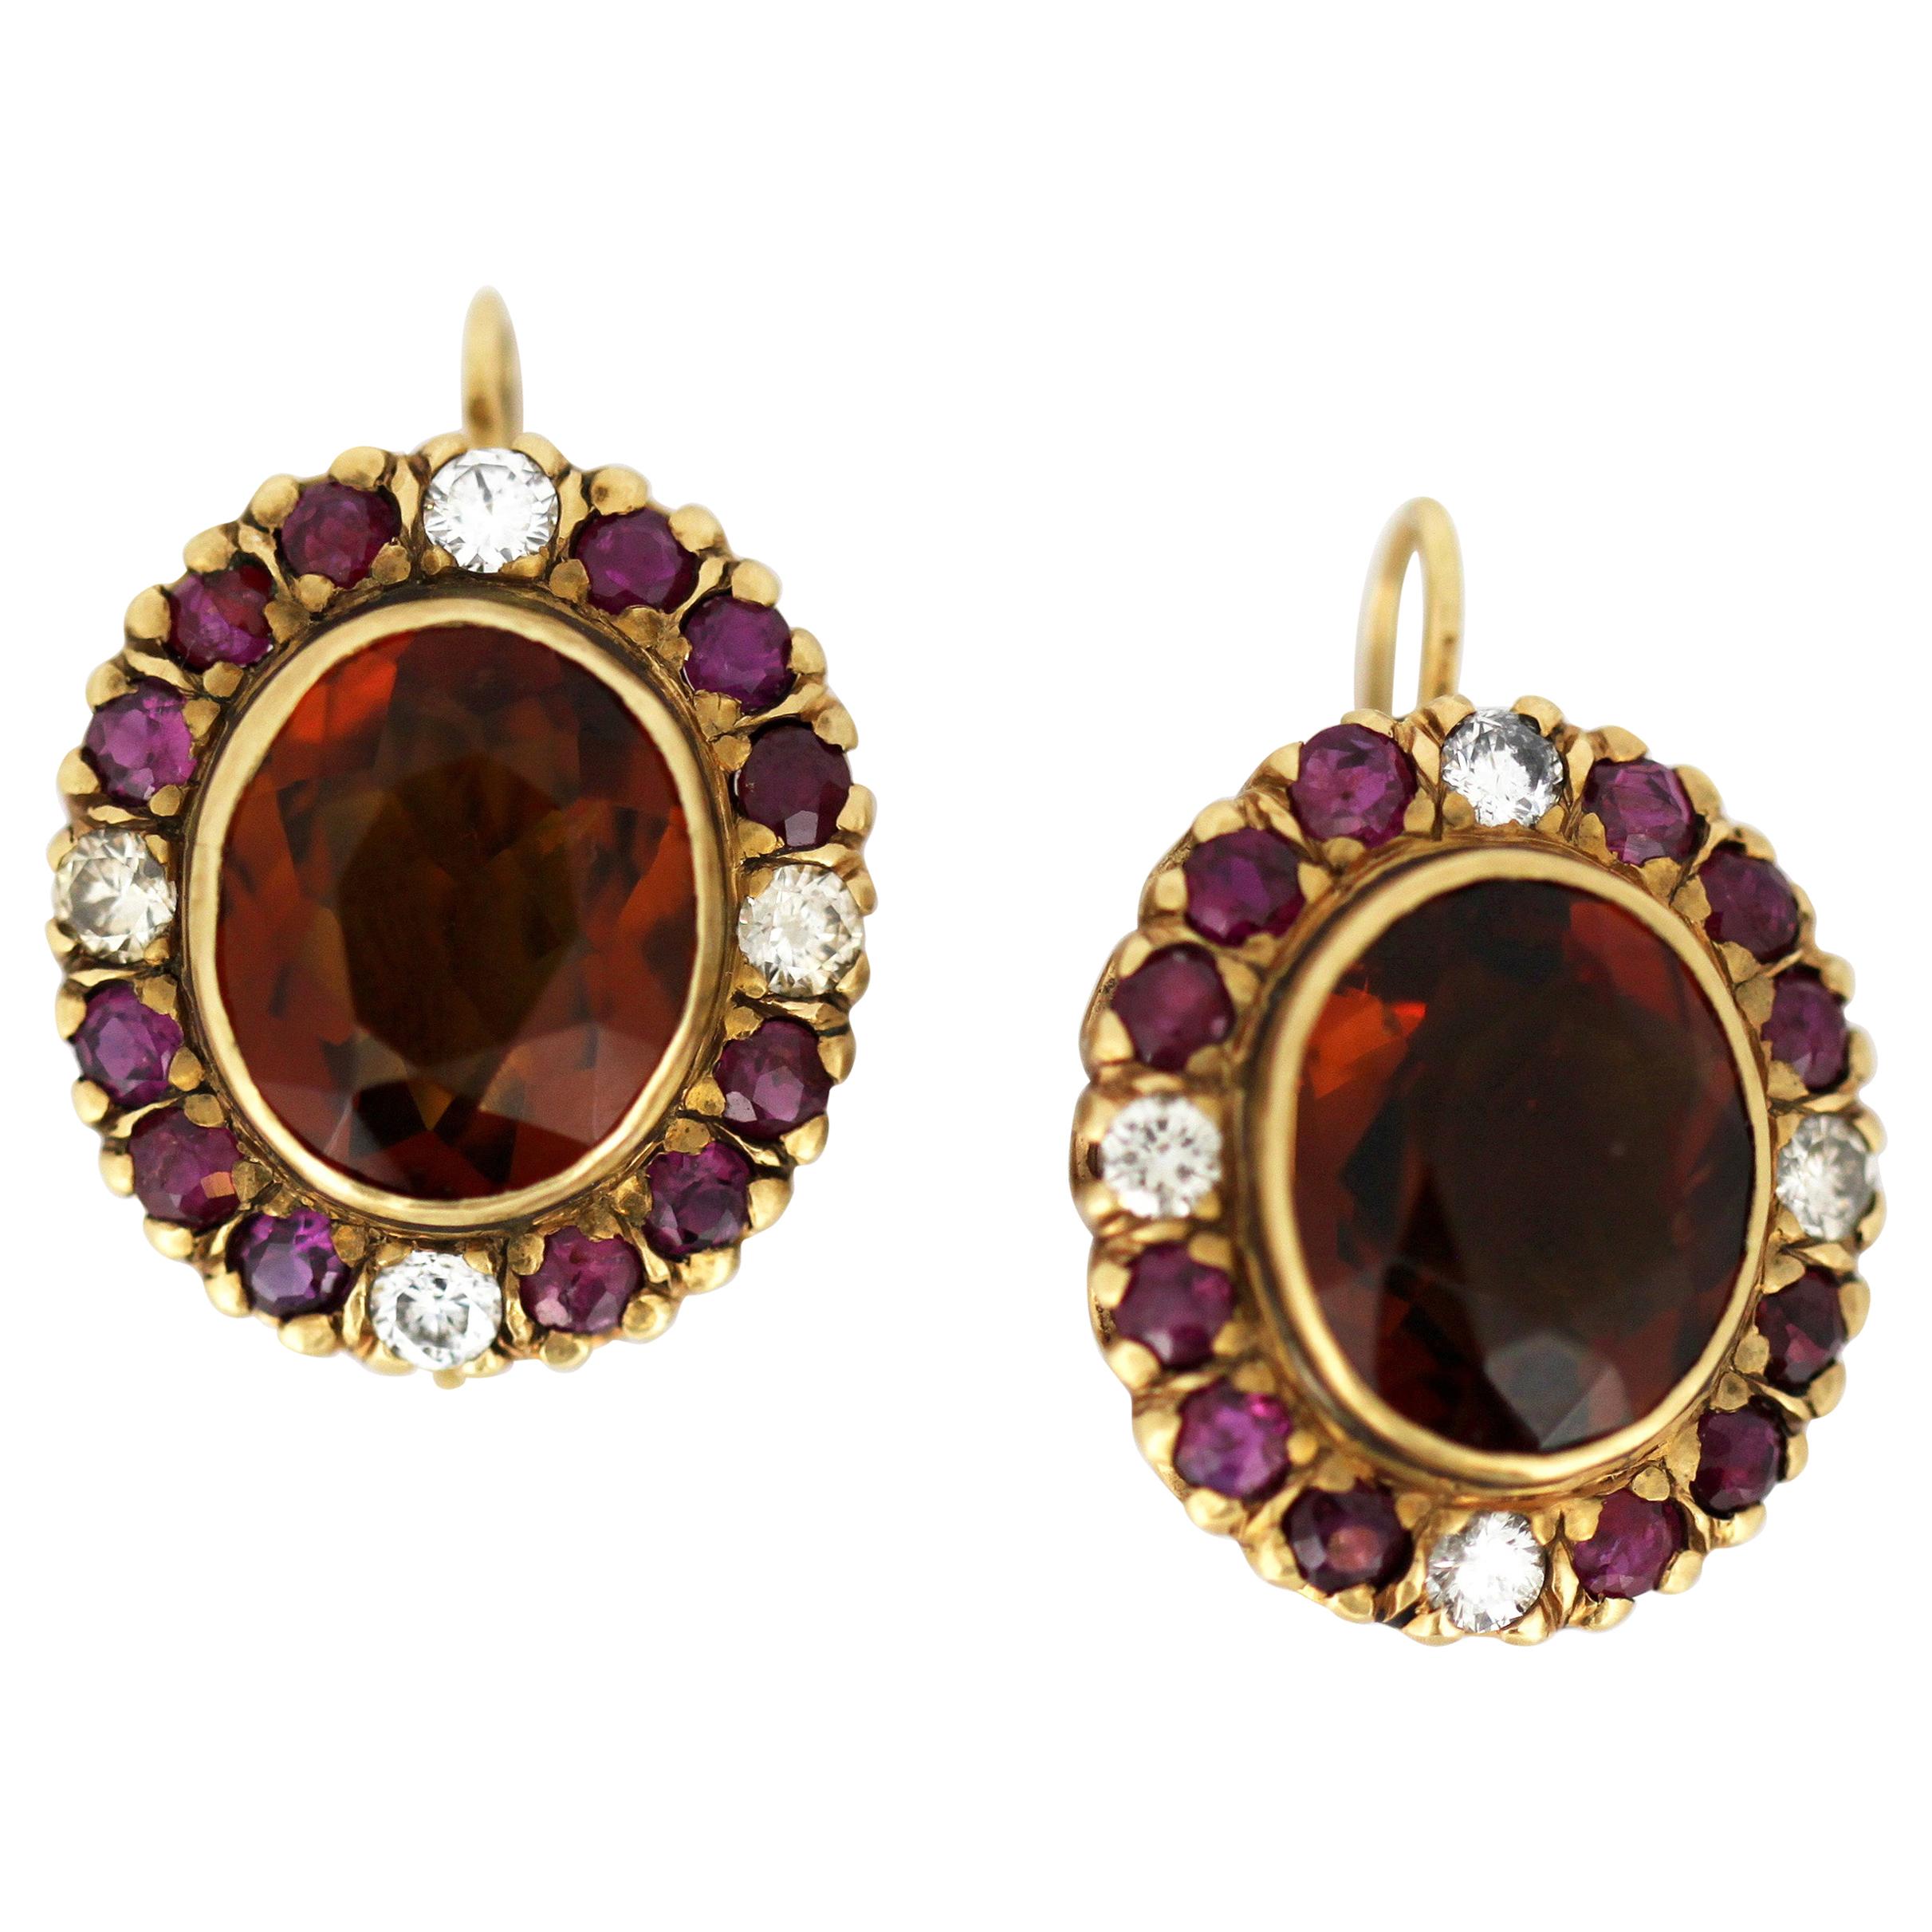 18kt Yellow Gold Ladies Clip-On Earrings with Garnets, Diamonds and Rubies, 1970